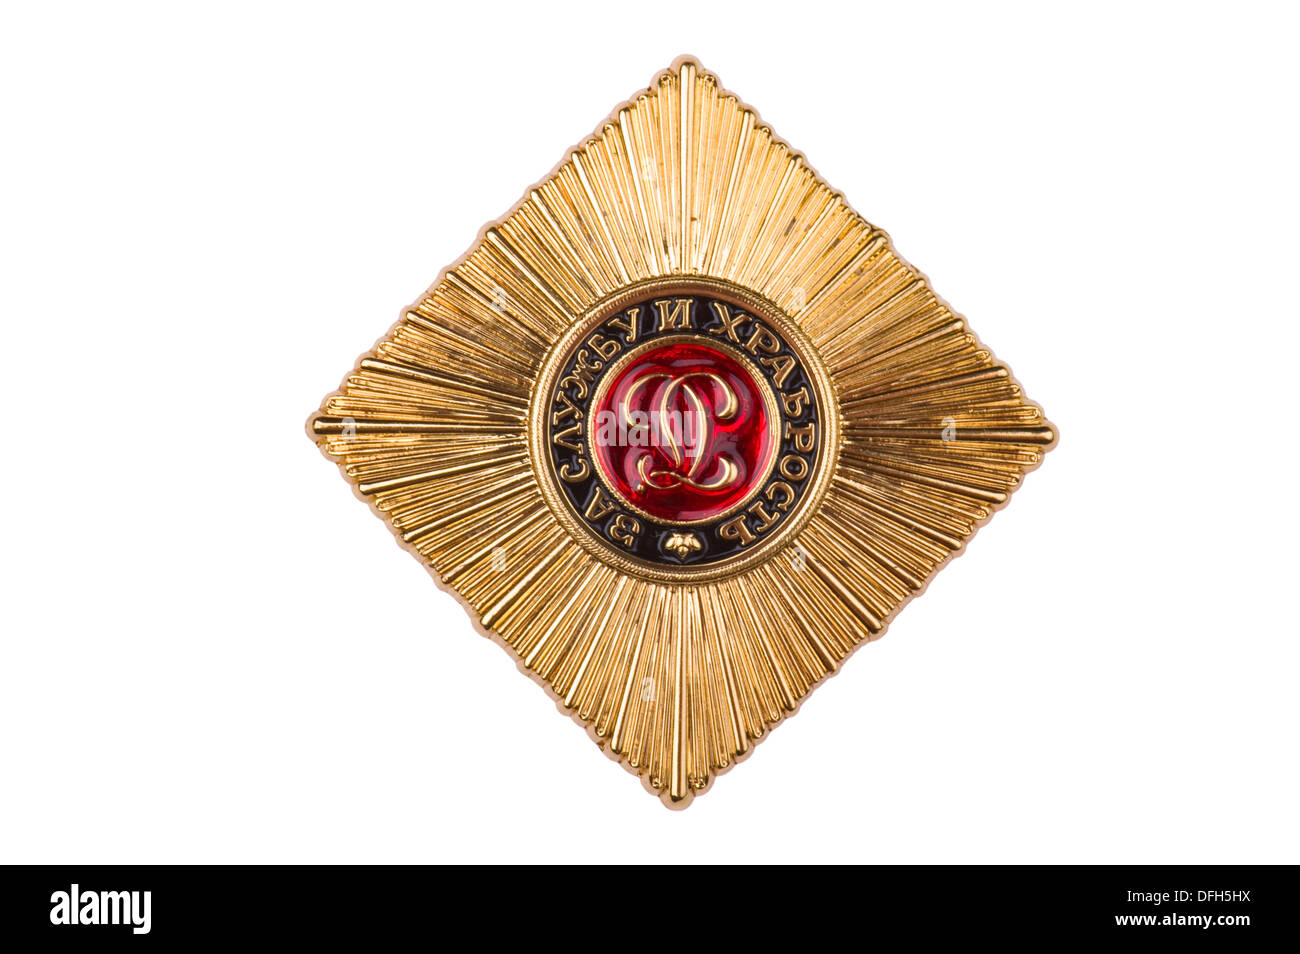 awards of the Russian Empire Star of the Order of St George the Great Martyr and Conqueror Stock Photo